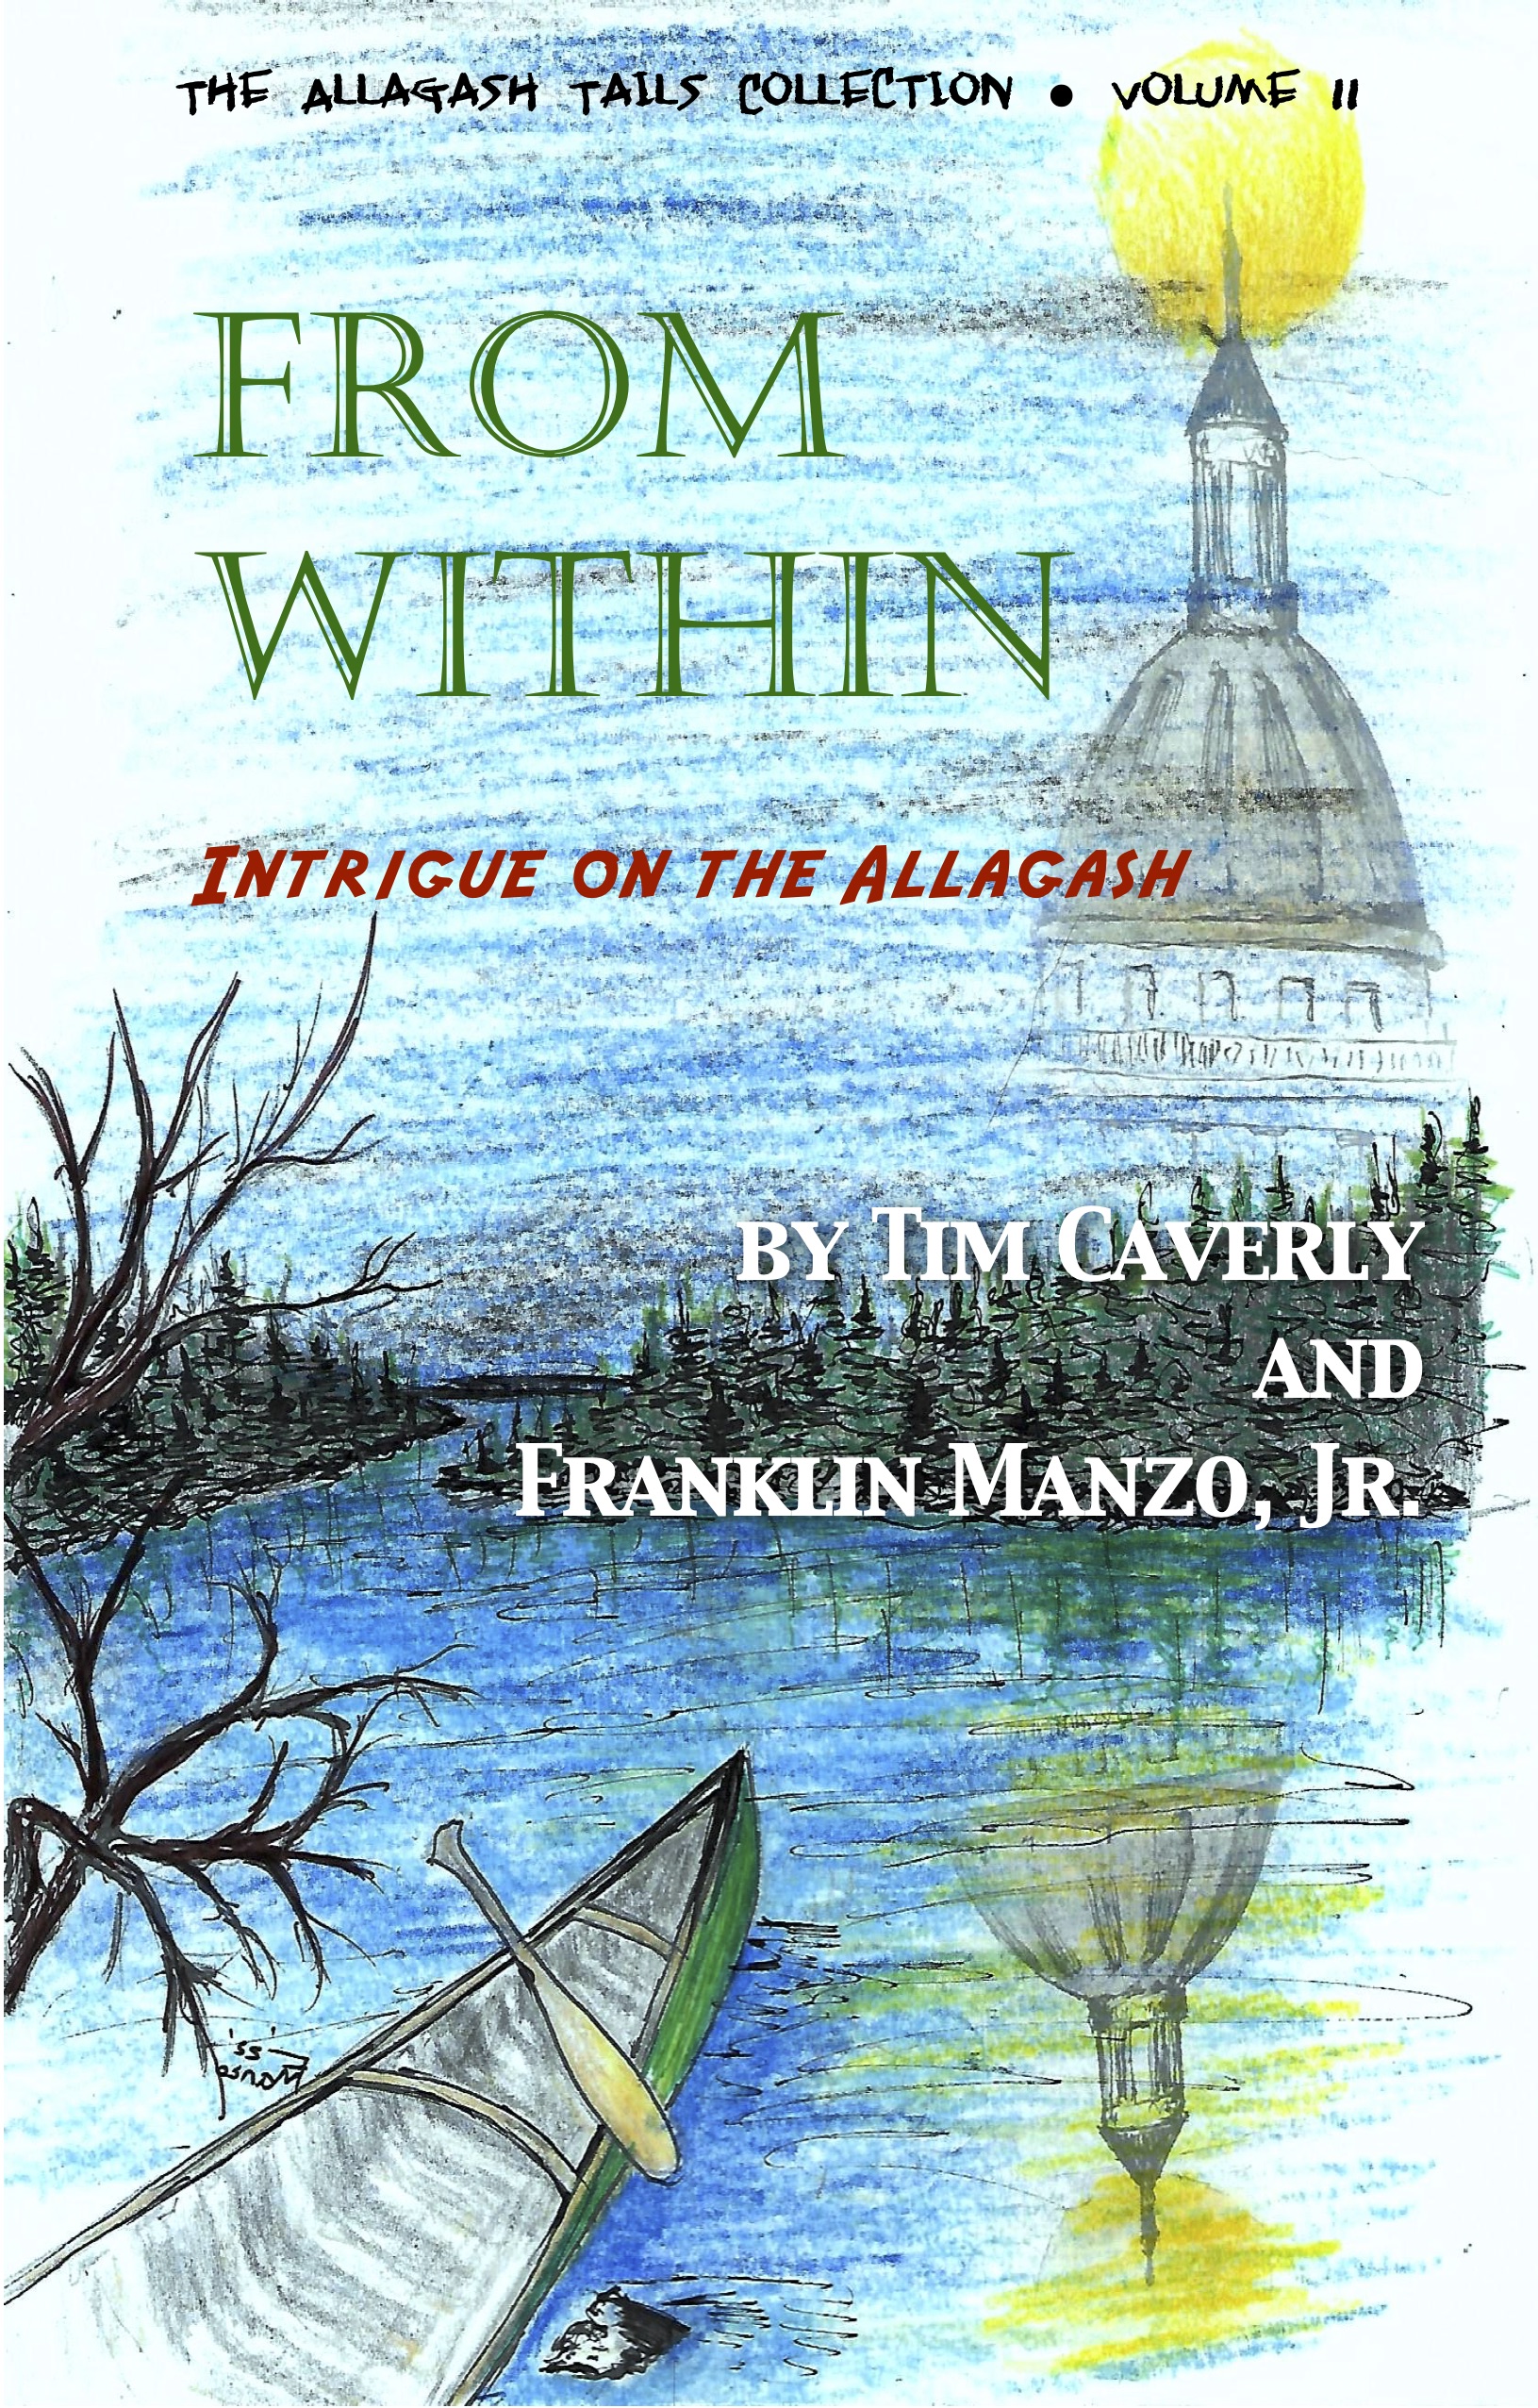 From Within • Intrigue On The Allagash • Book 11 in The Allagash Tails Collection